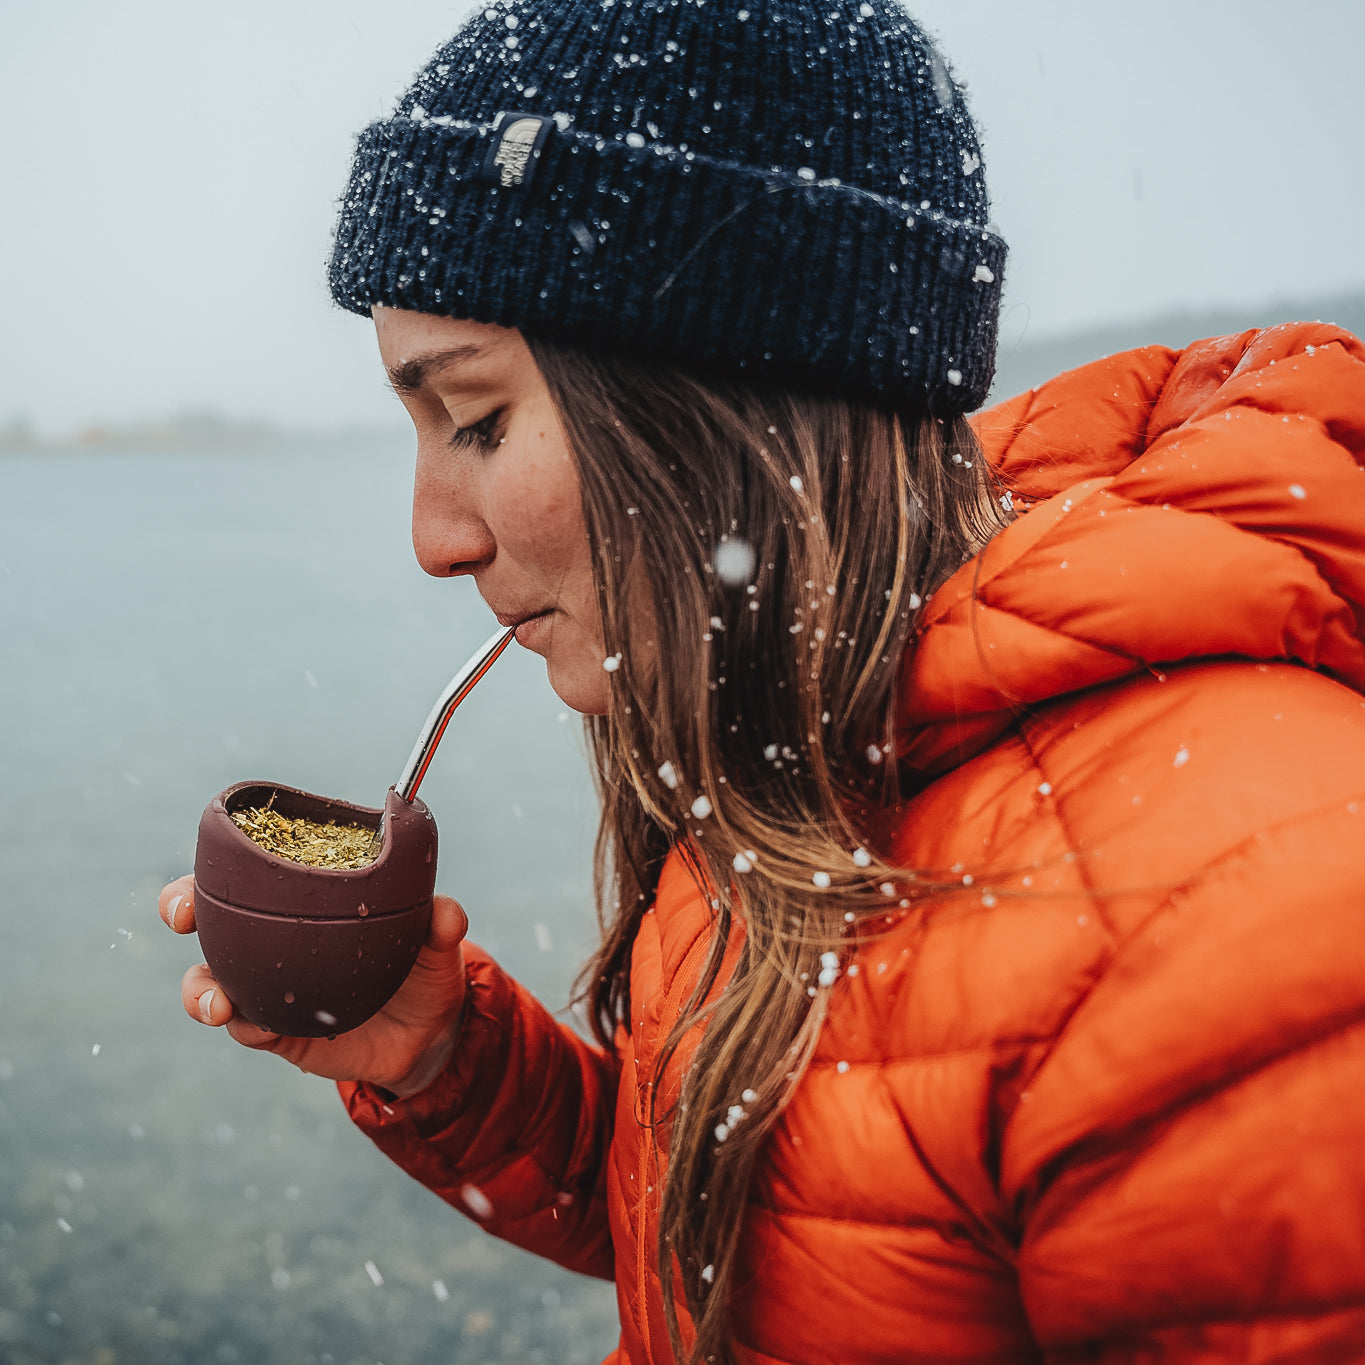 Celebrate the Holidays with Yerba Mate: 3 Reasons it Makes the Perfect Gift!